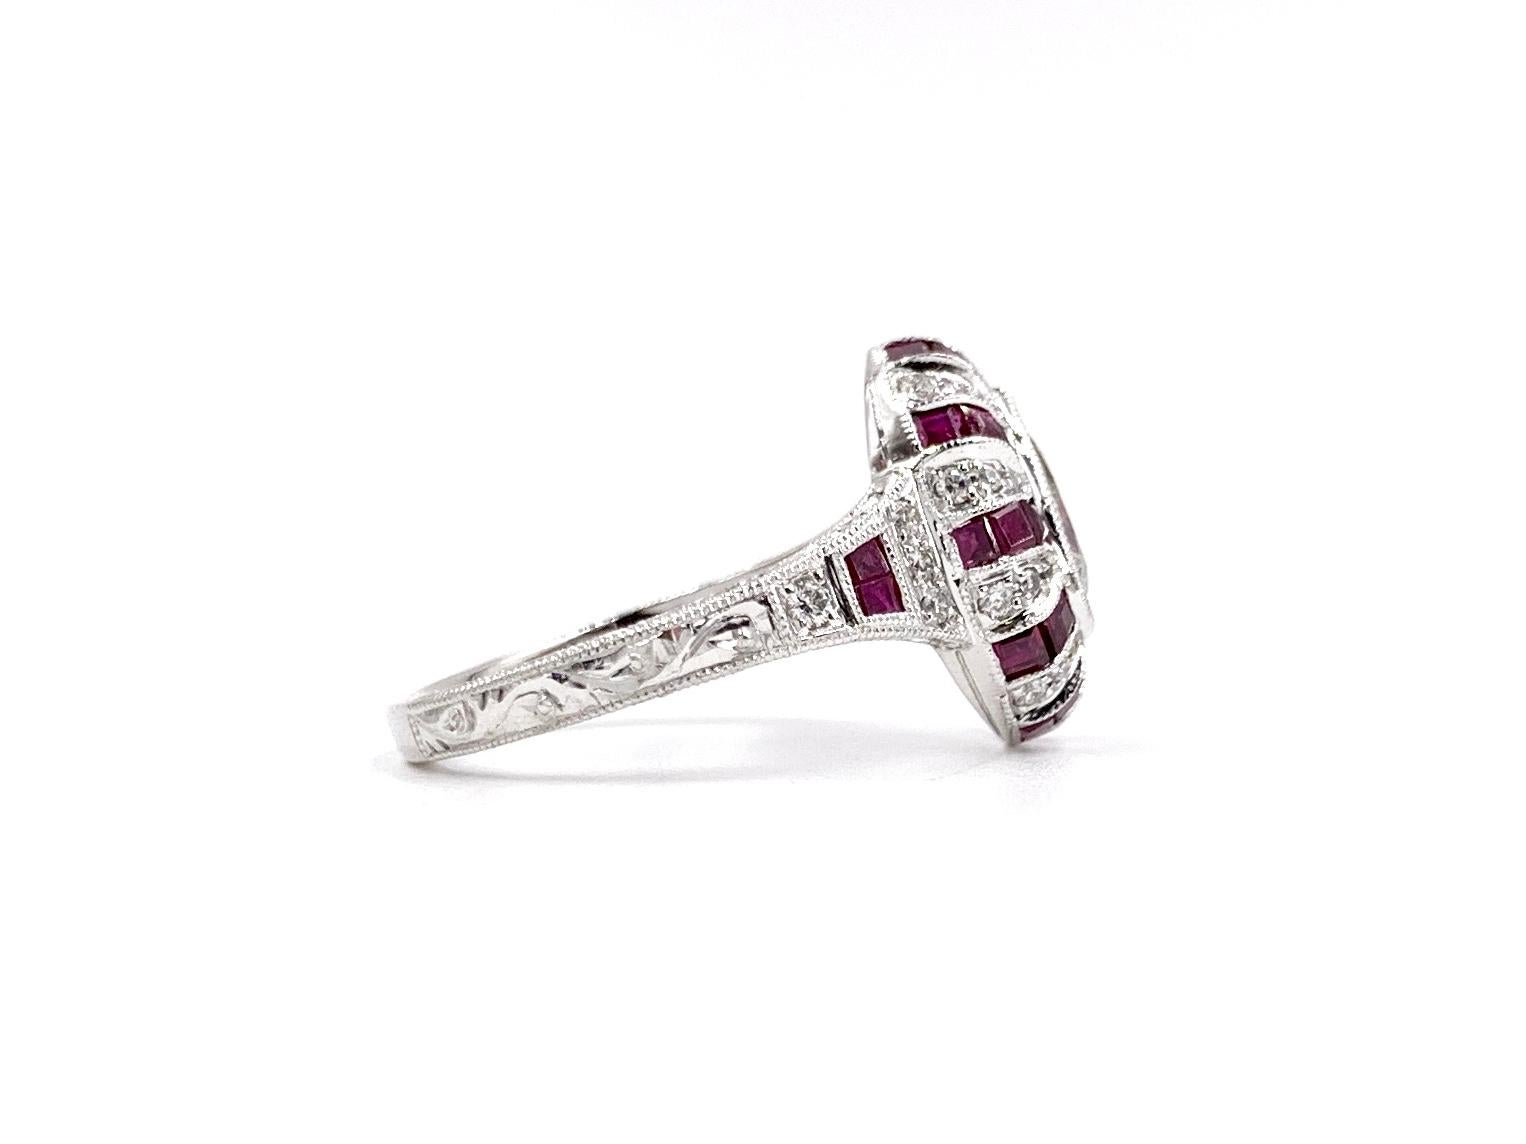 Pear Cut Art Deco Inspired Pear Shape Diamond and Ruby Ring